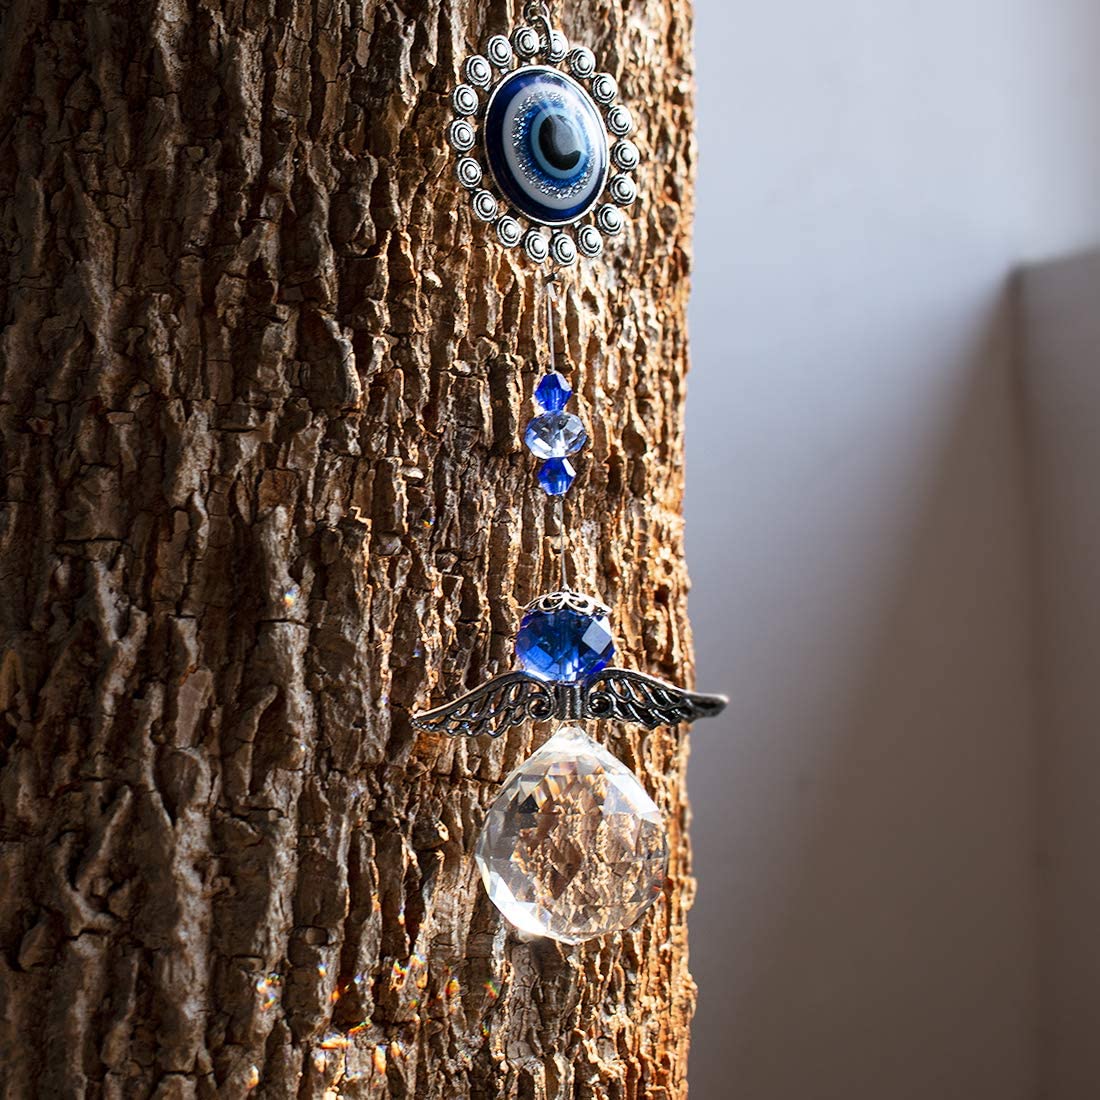 Crystal Angel Suncatcher with Feng Shui Turkish Blue Evil Eye Protection and Good Luck Gift